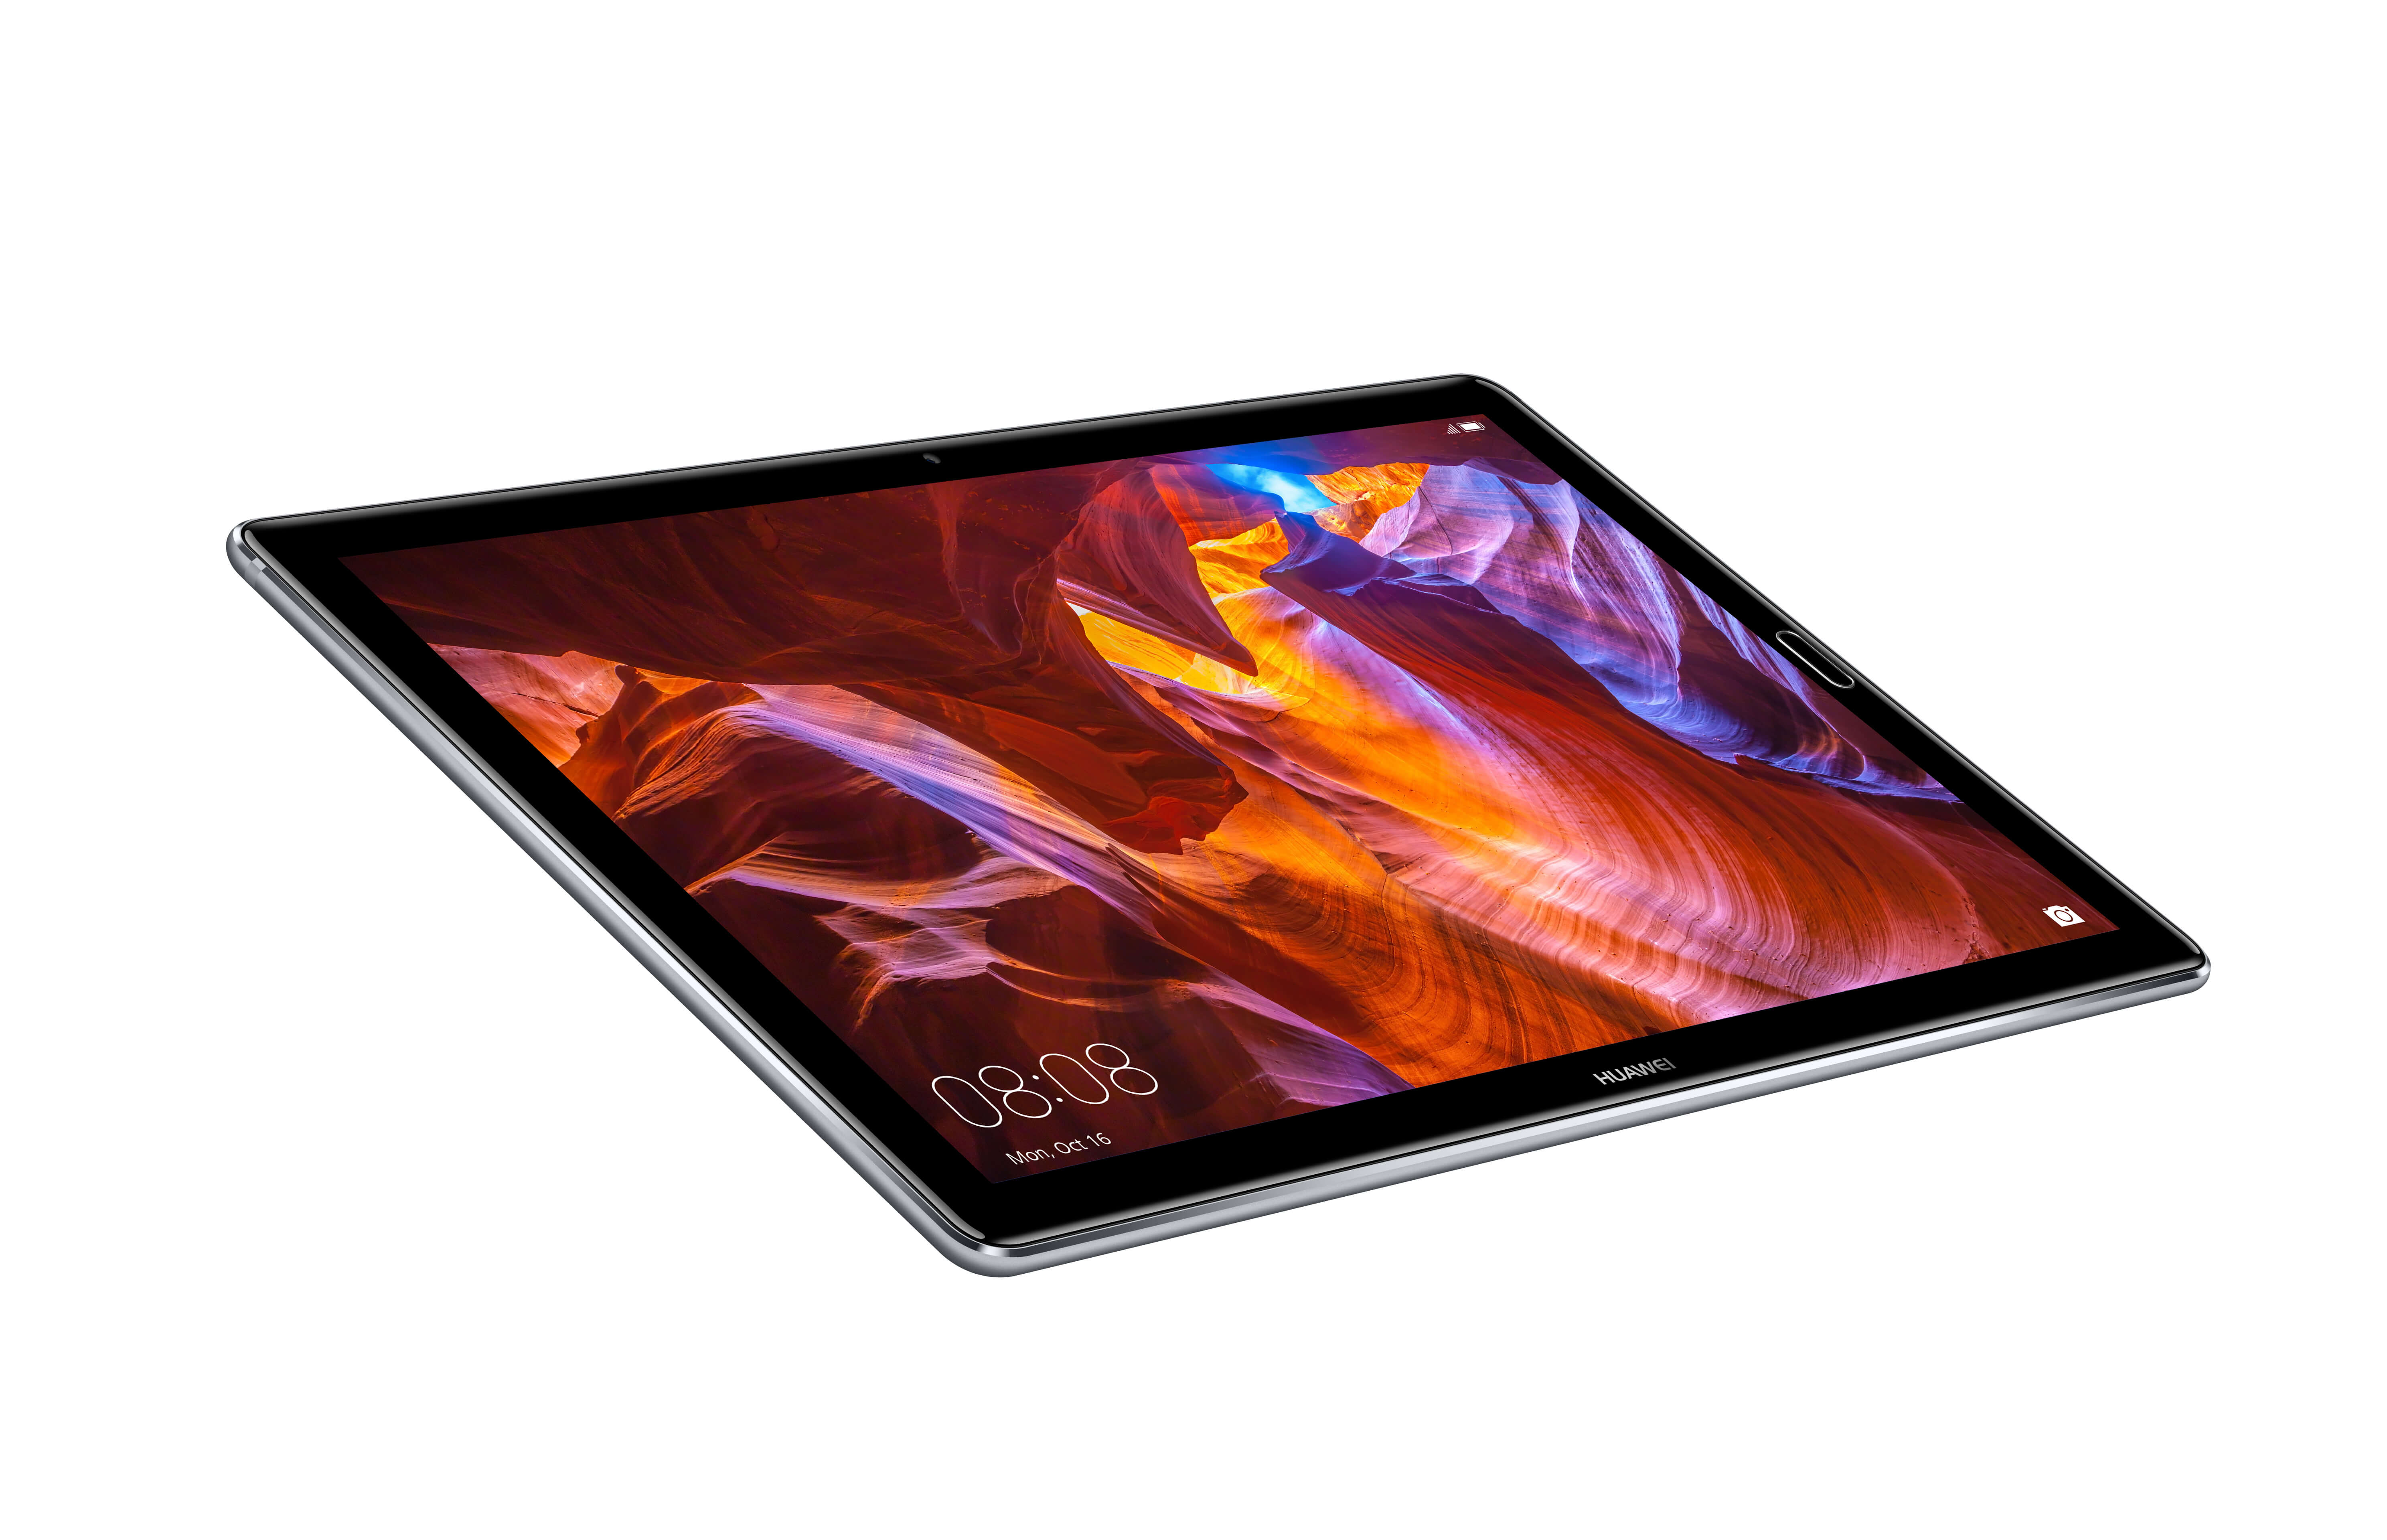 Huawei MediaPad M5 Lineup Now Available in The United States